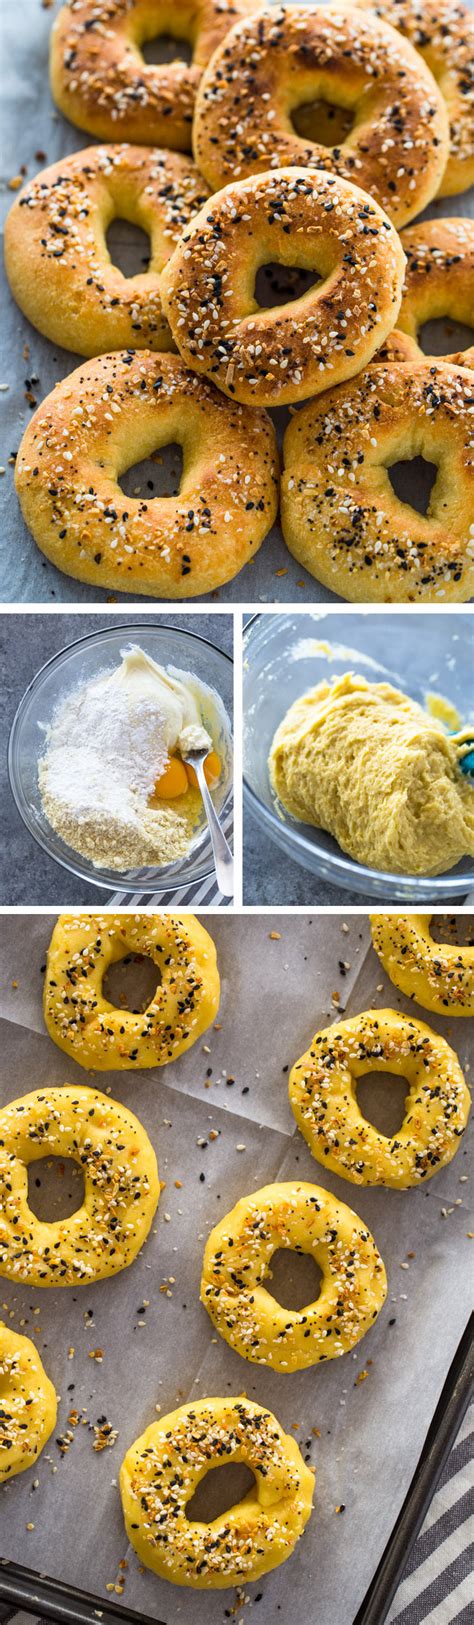 A low carb bagel recipe from danielle michalski made with vital wheat gluten, pecan meal, & protein powder. Low-Carb Keto Bagels | Gimme Delicious